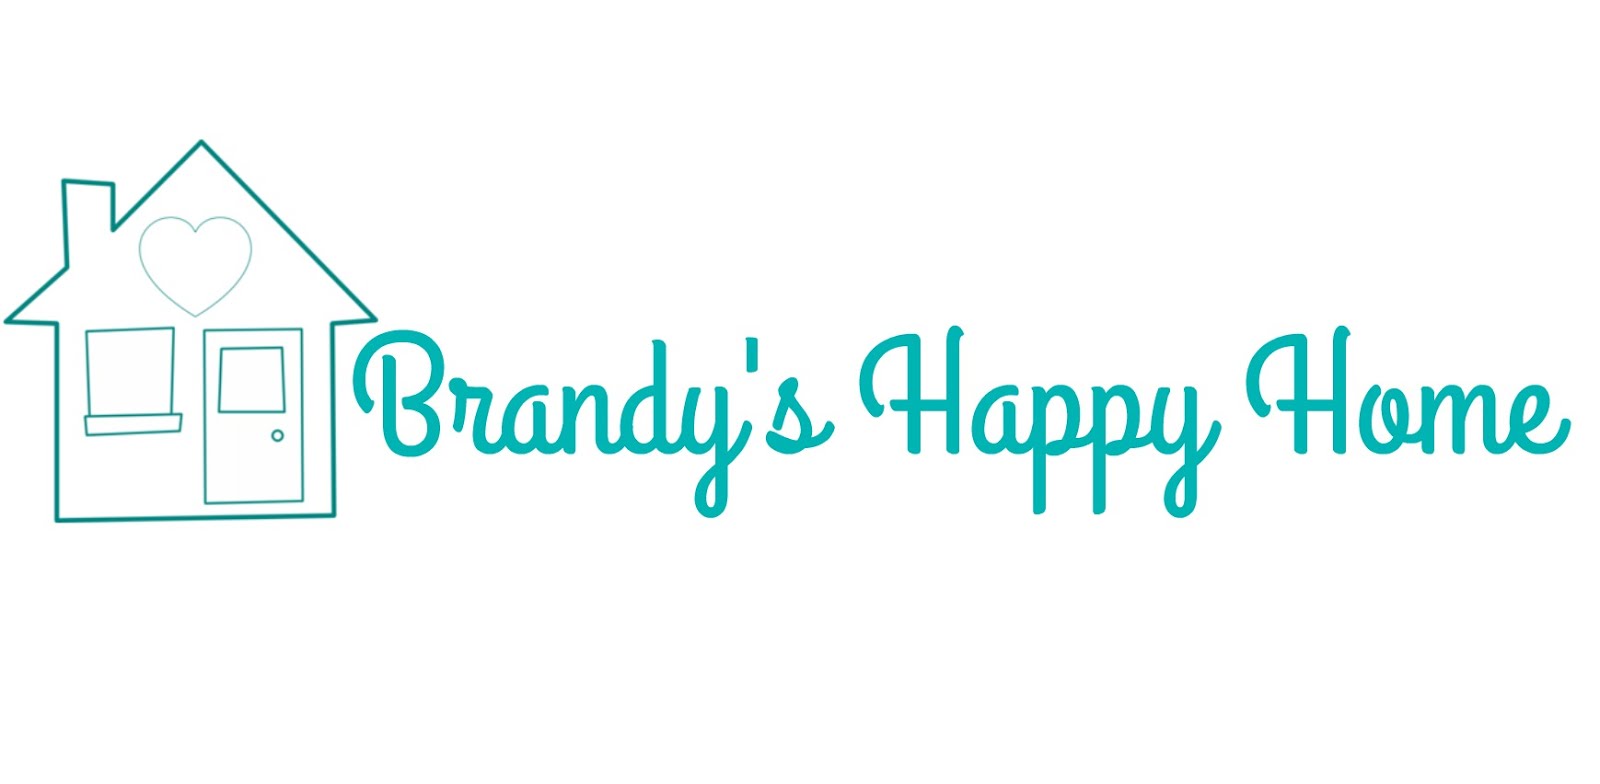 See what Brandy is up to at home!